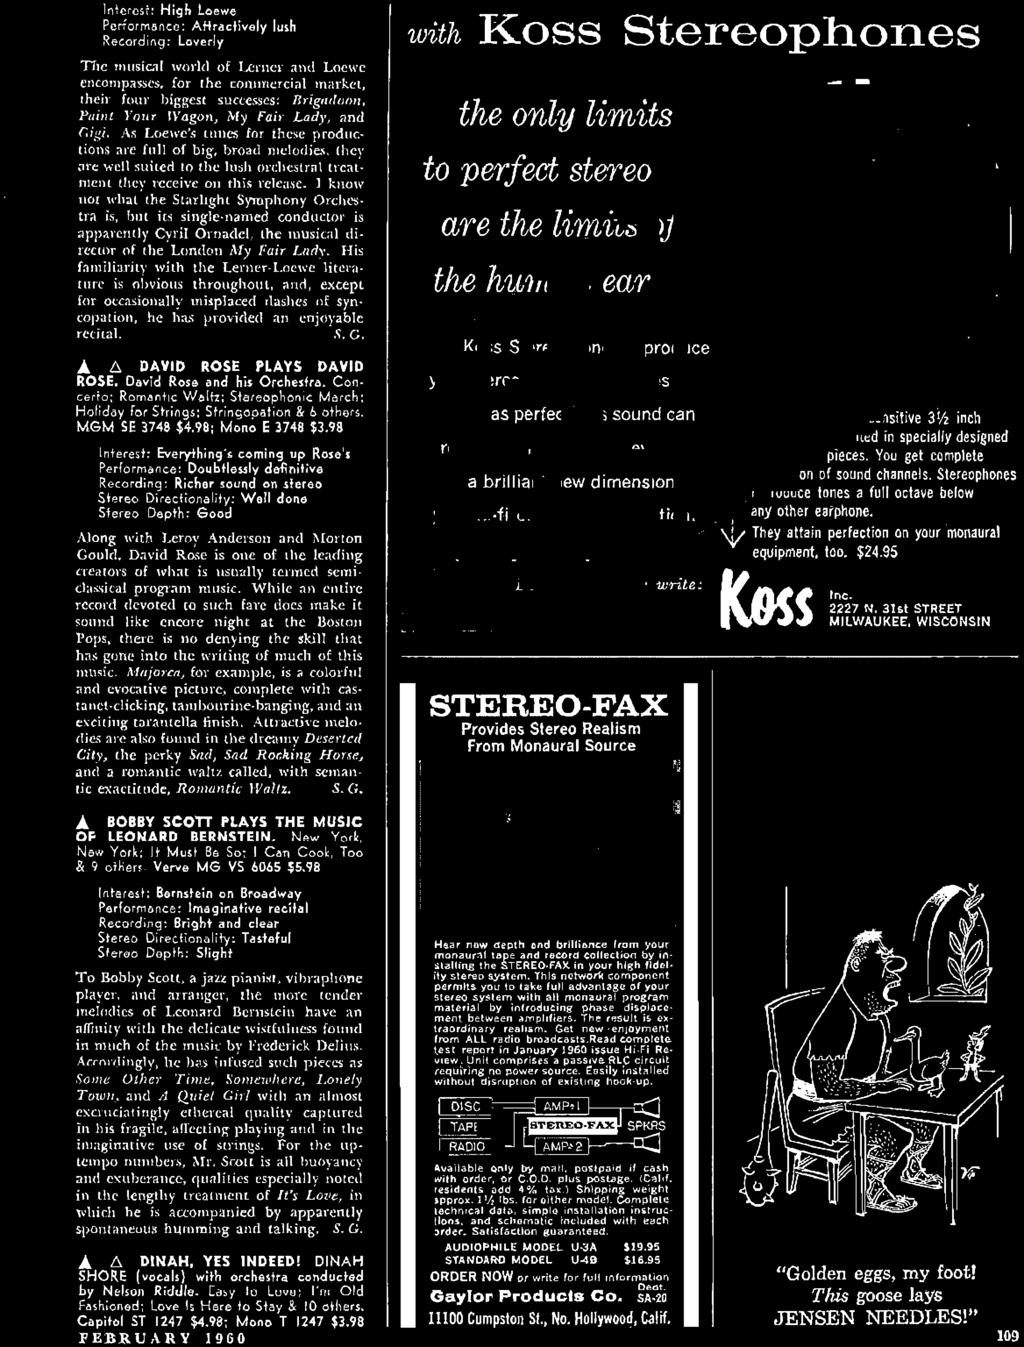 98 FEBRUARY 1960 Hear new depth and brilliance from your m onaural tape and record collection by insta lling the STER EO FAX in your high fidel ity stereo system.